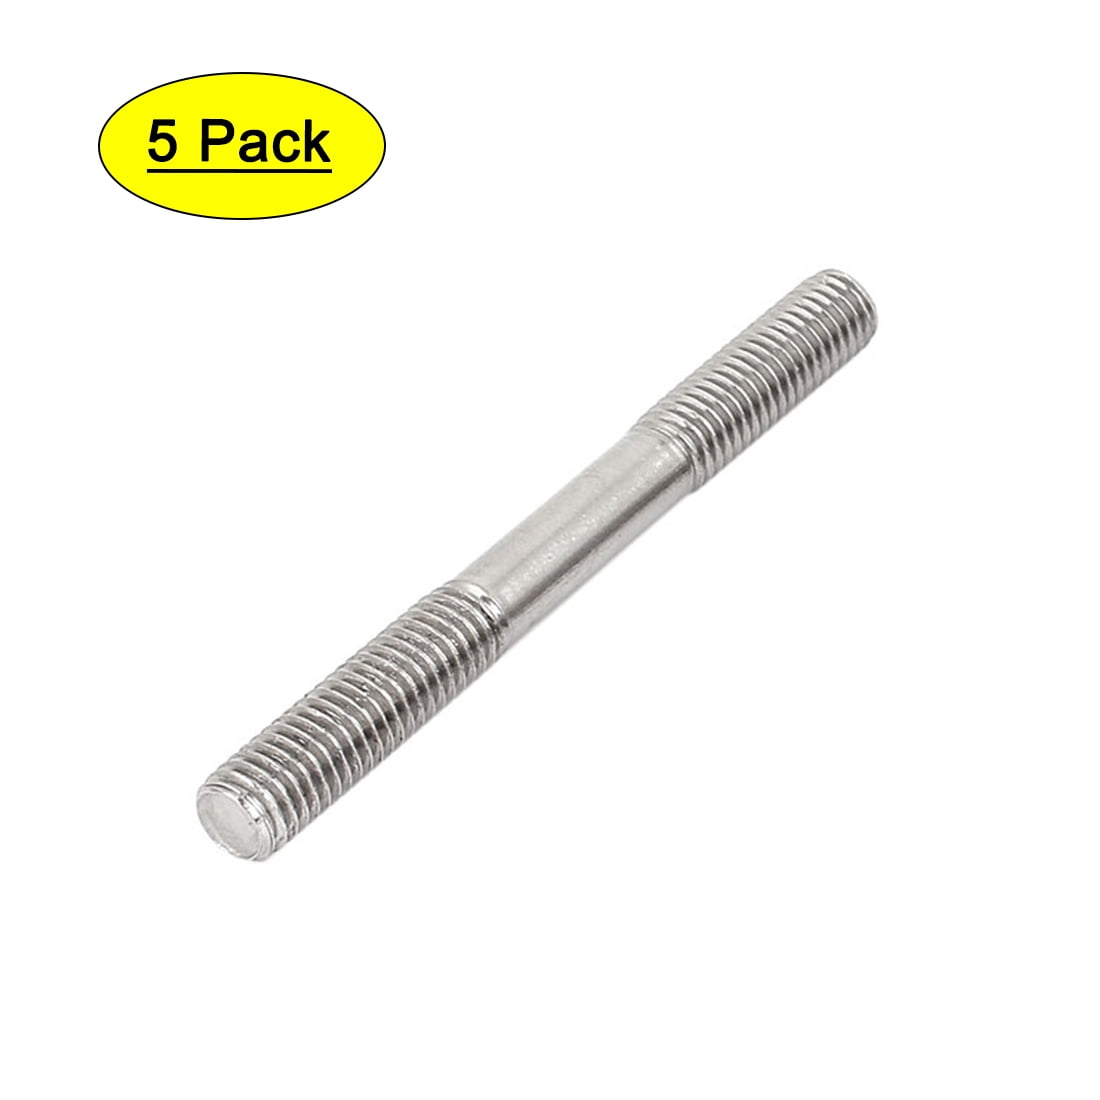 10 Pack Dorman 675-337 Double Ended Stud M8-1.25 x 19mm and M8-1.25 x 10mm